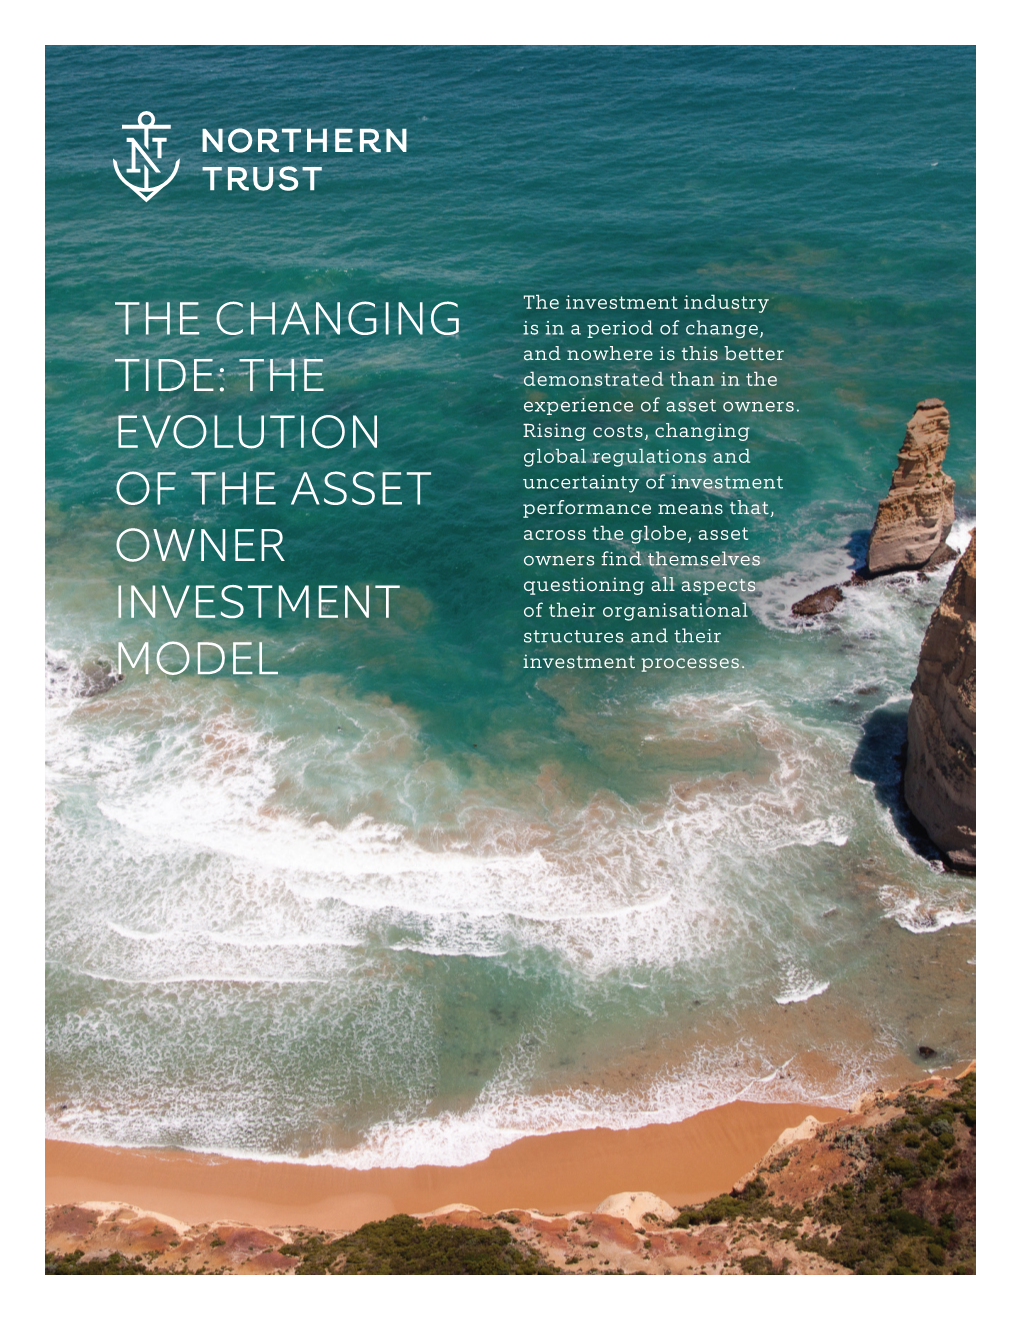 The Changing Tide: the Evolution of the Asset Owner Investment Model